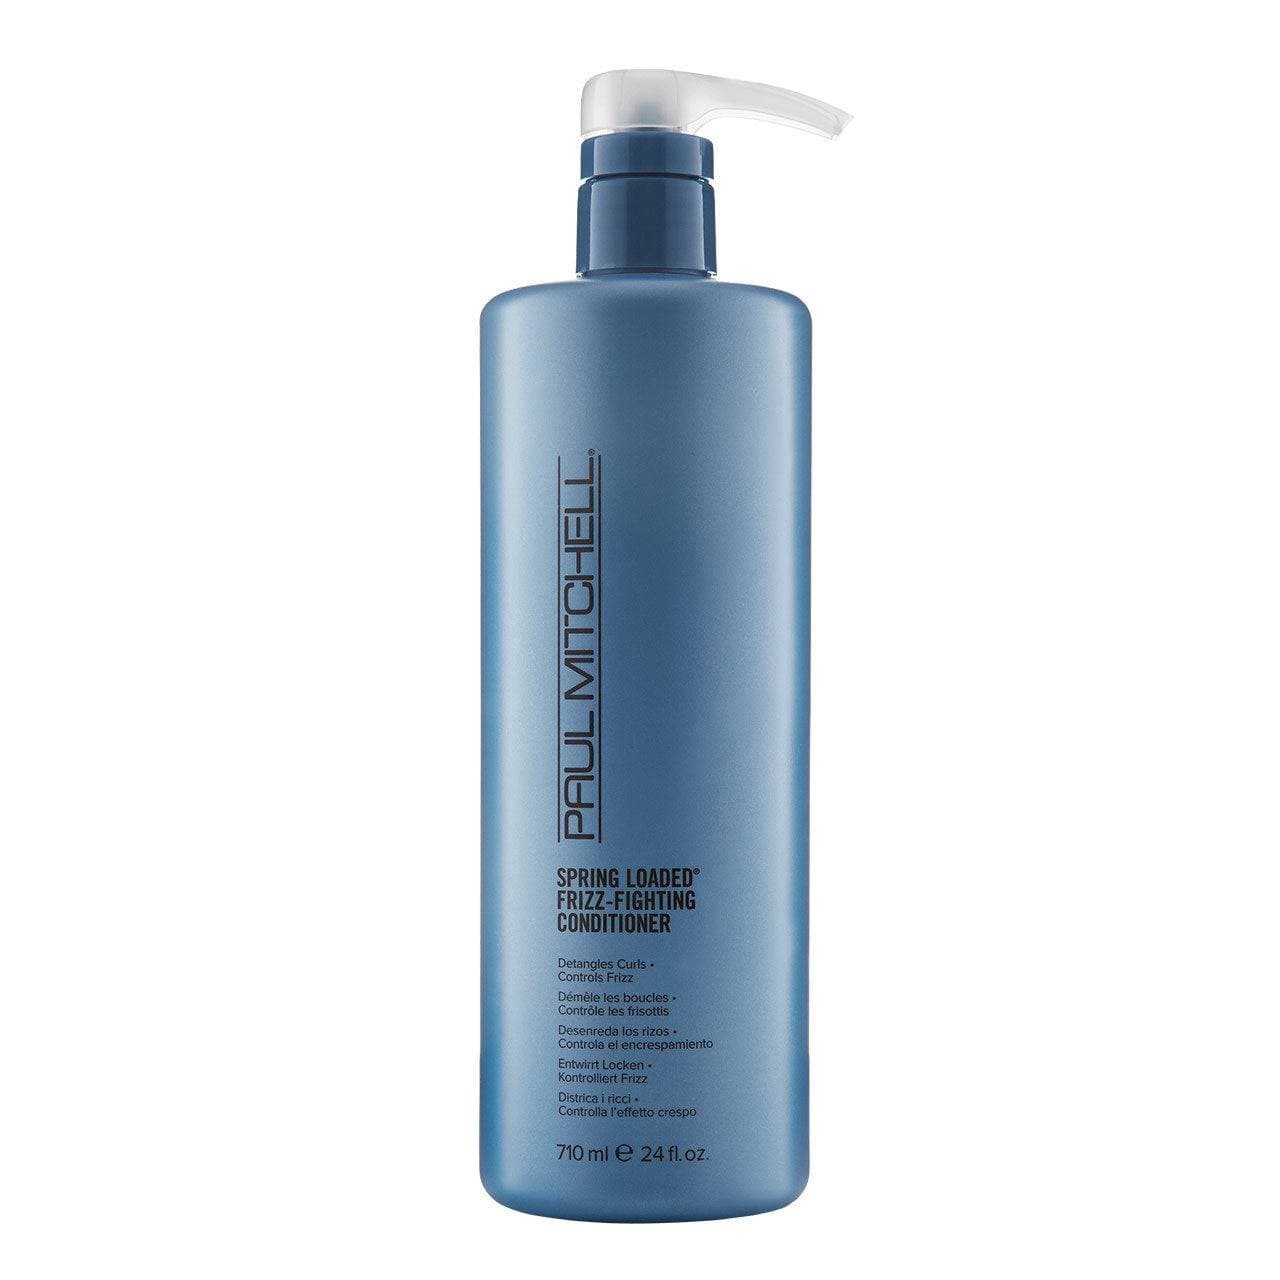 Paul Mitchell Curls Spring Loaded Frizz Fighting Conditioner 710ml